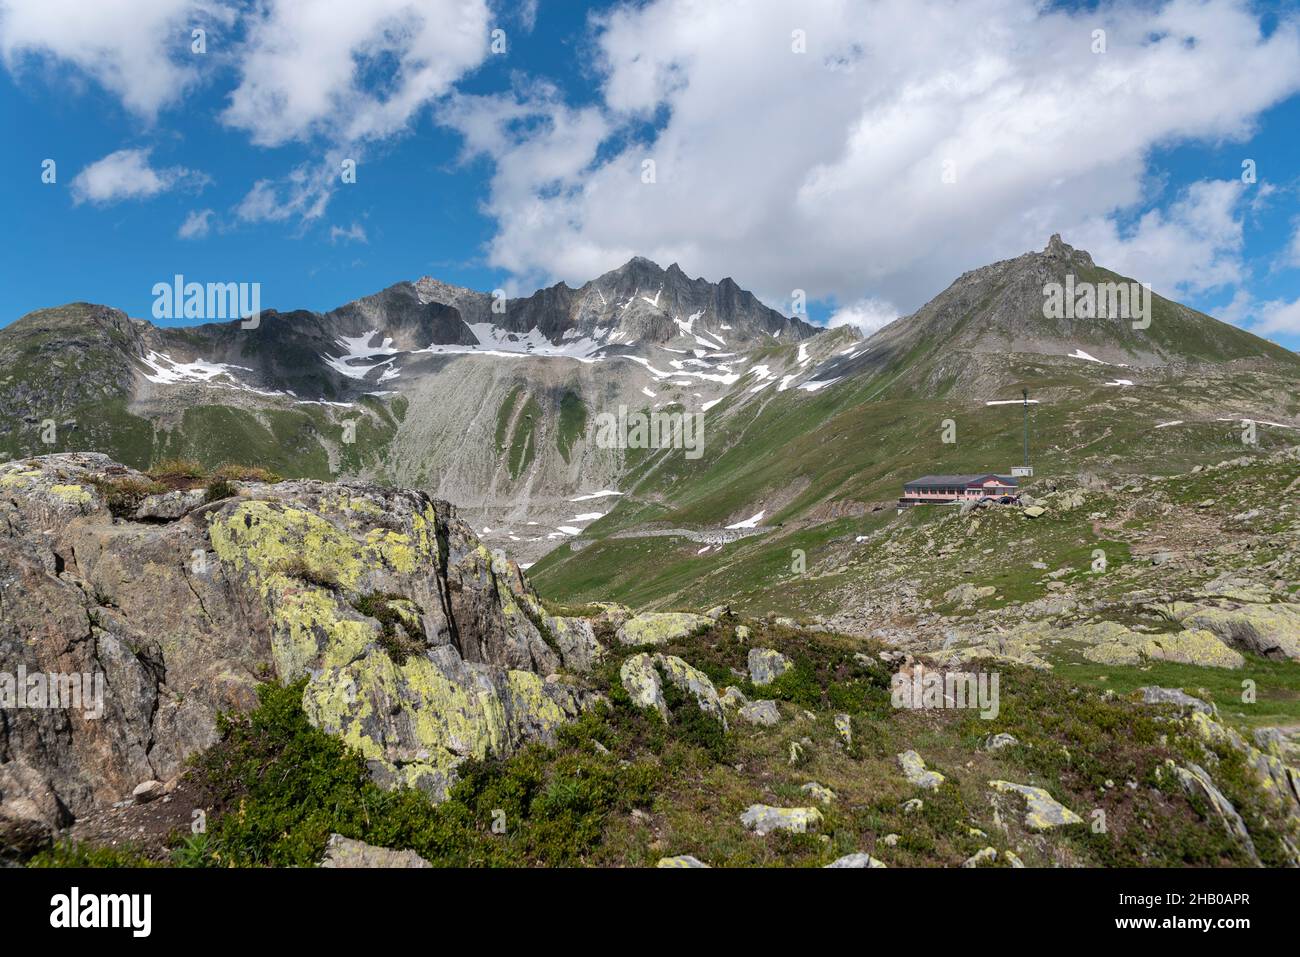 Alpine landscape at the Nufenen Pass with the mountains Piizzo Gallina and Chilchhorn, Ulrichen, Valais, Switzerland, Europe Stock Photo